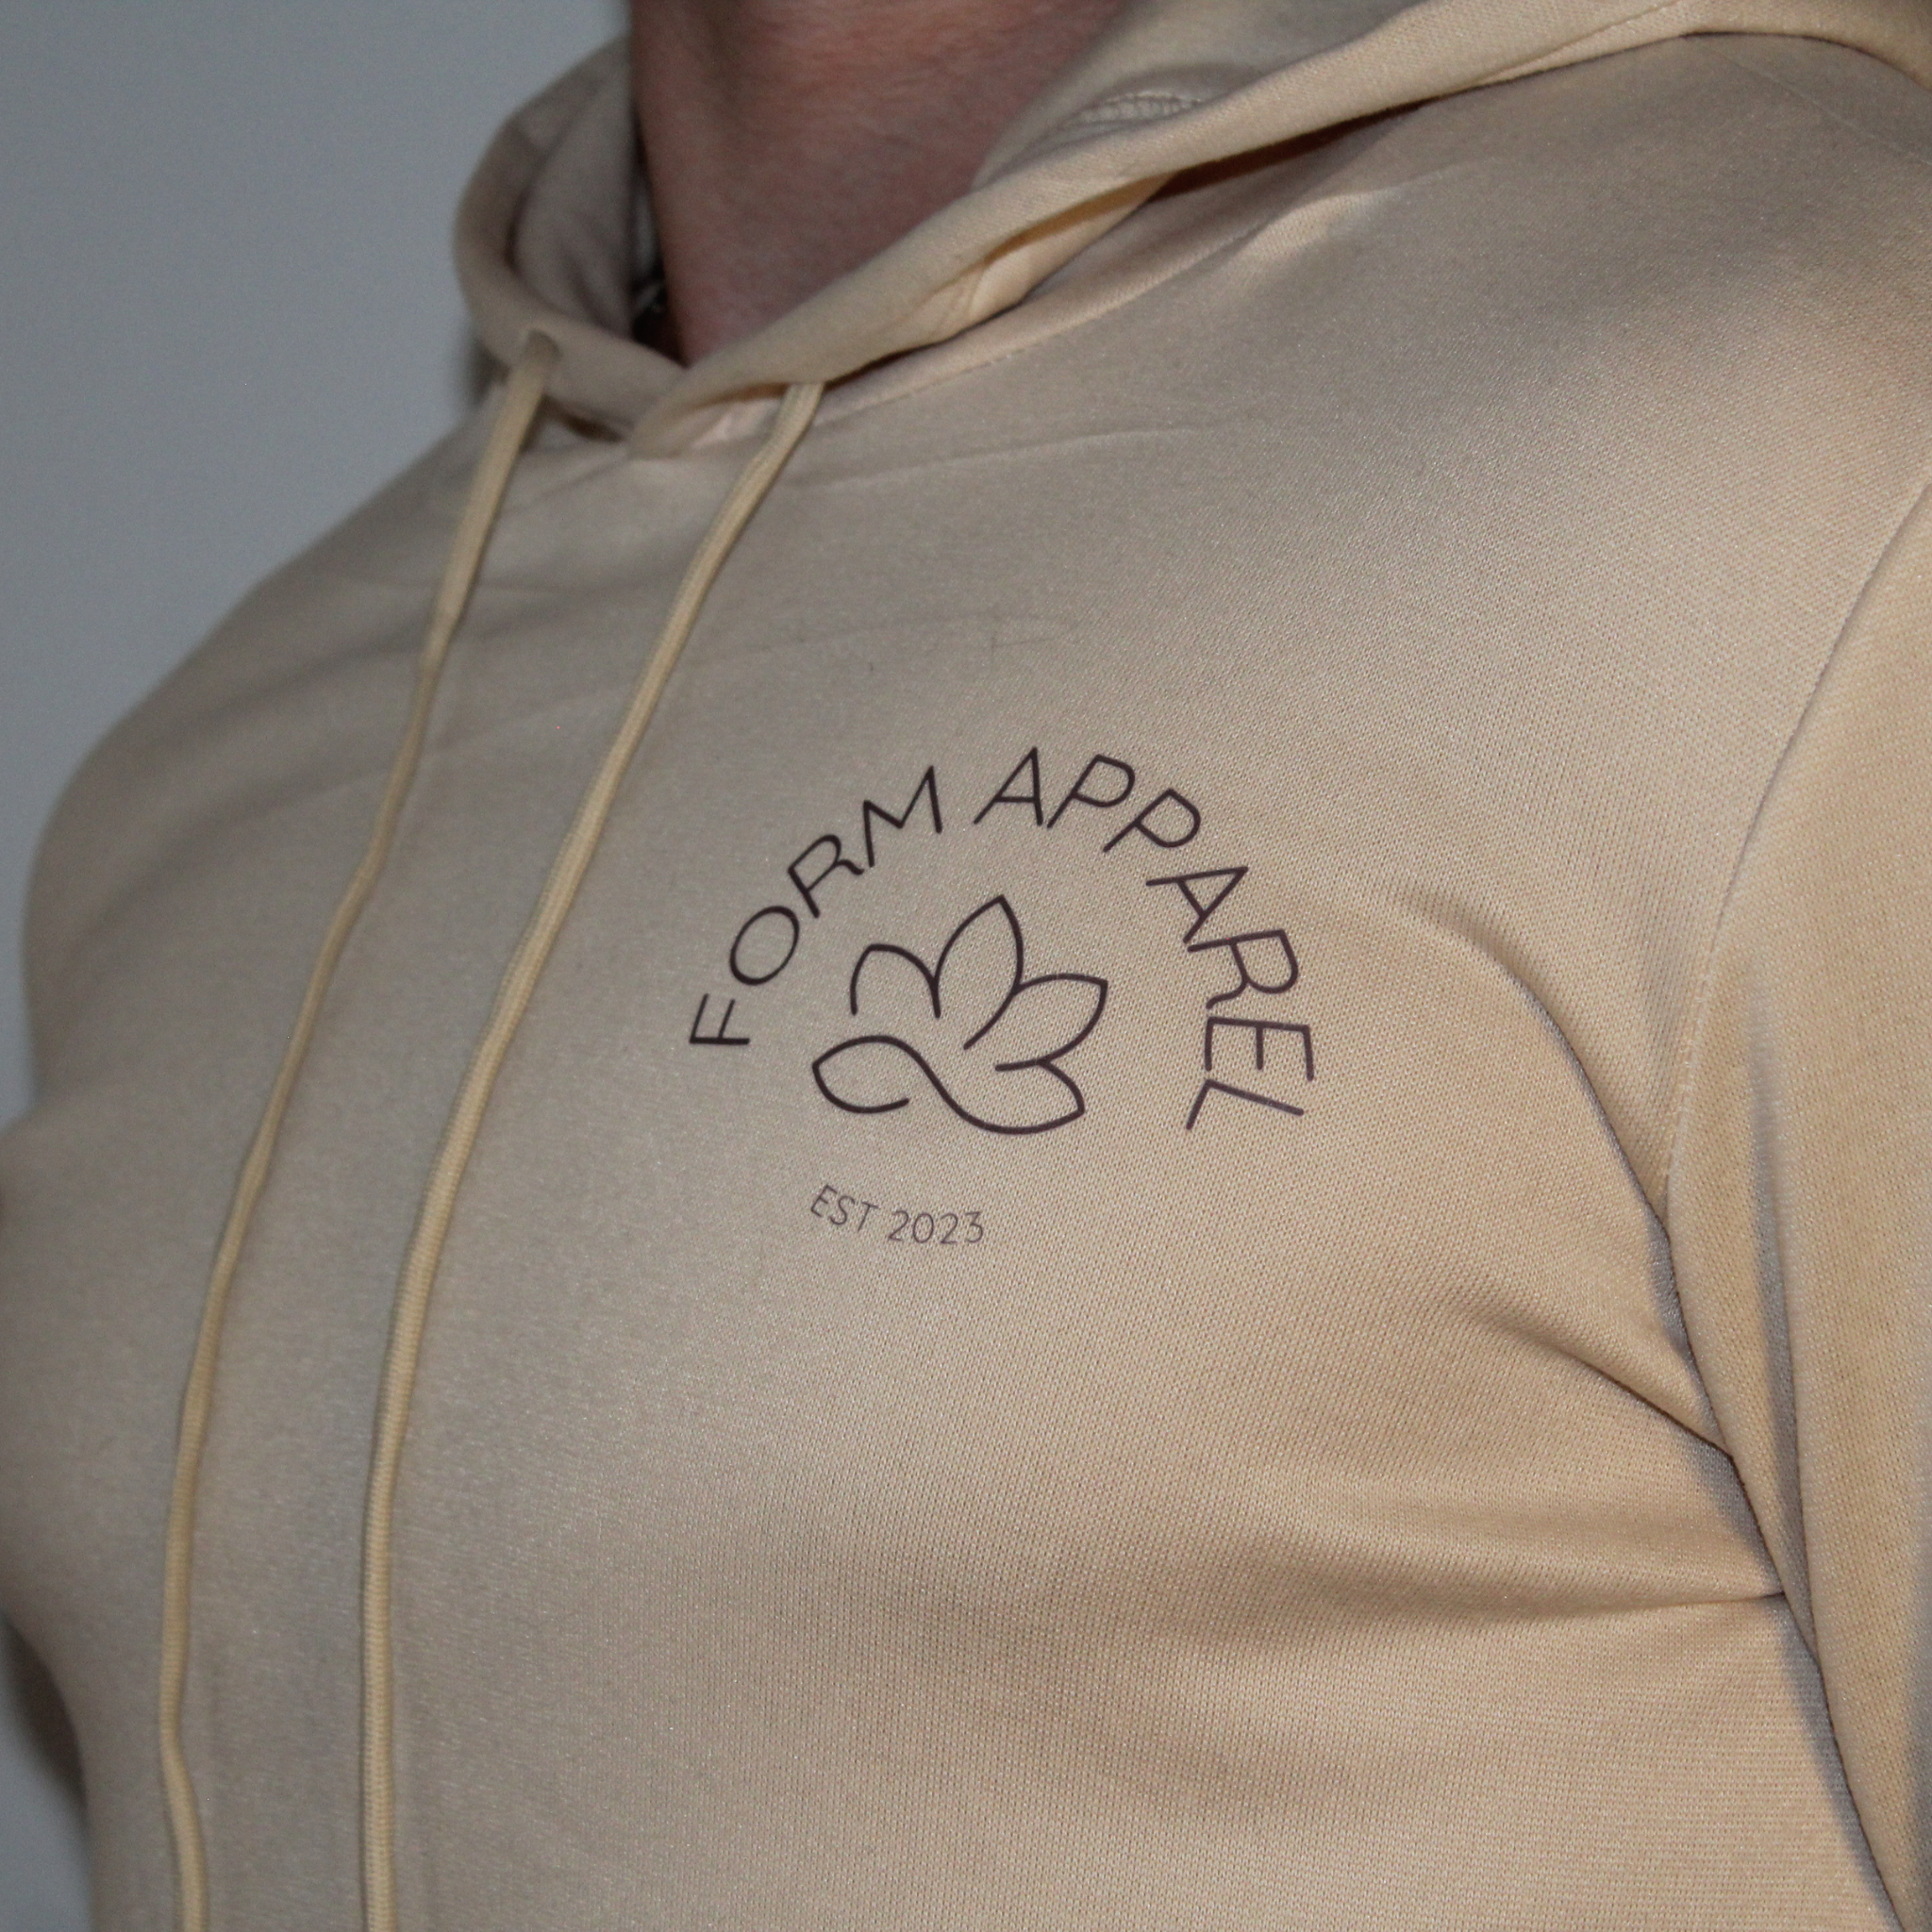 A close up on the Form Apparel logo